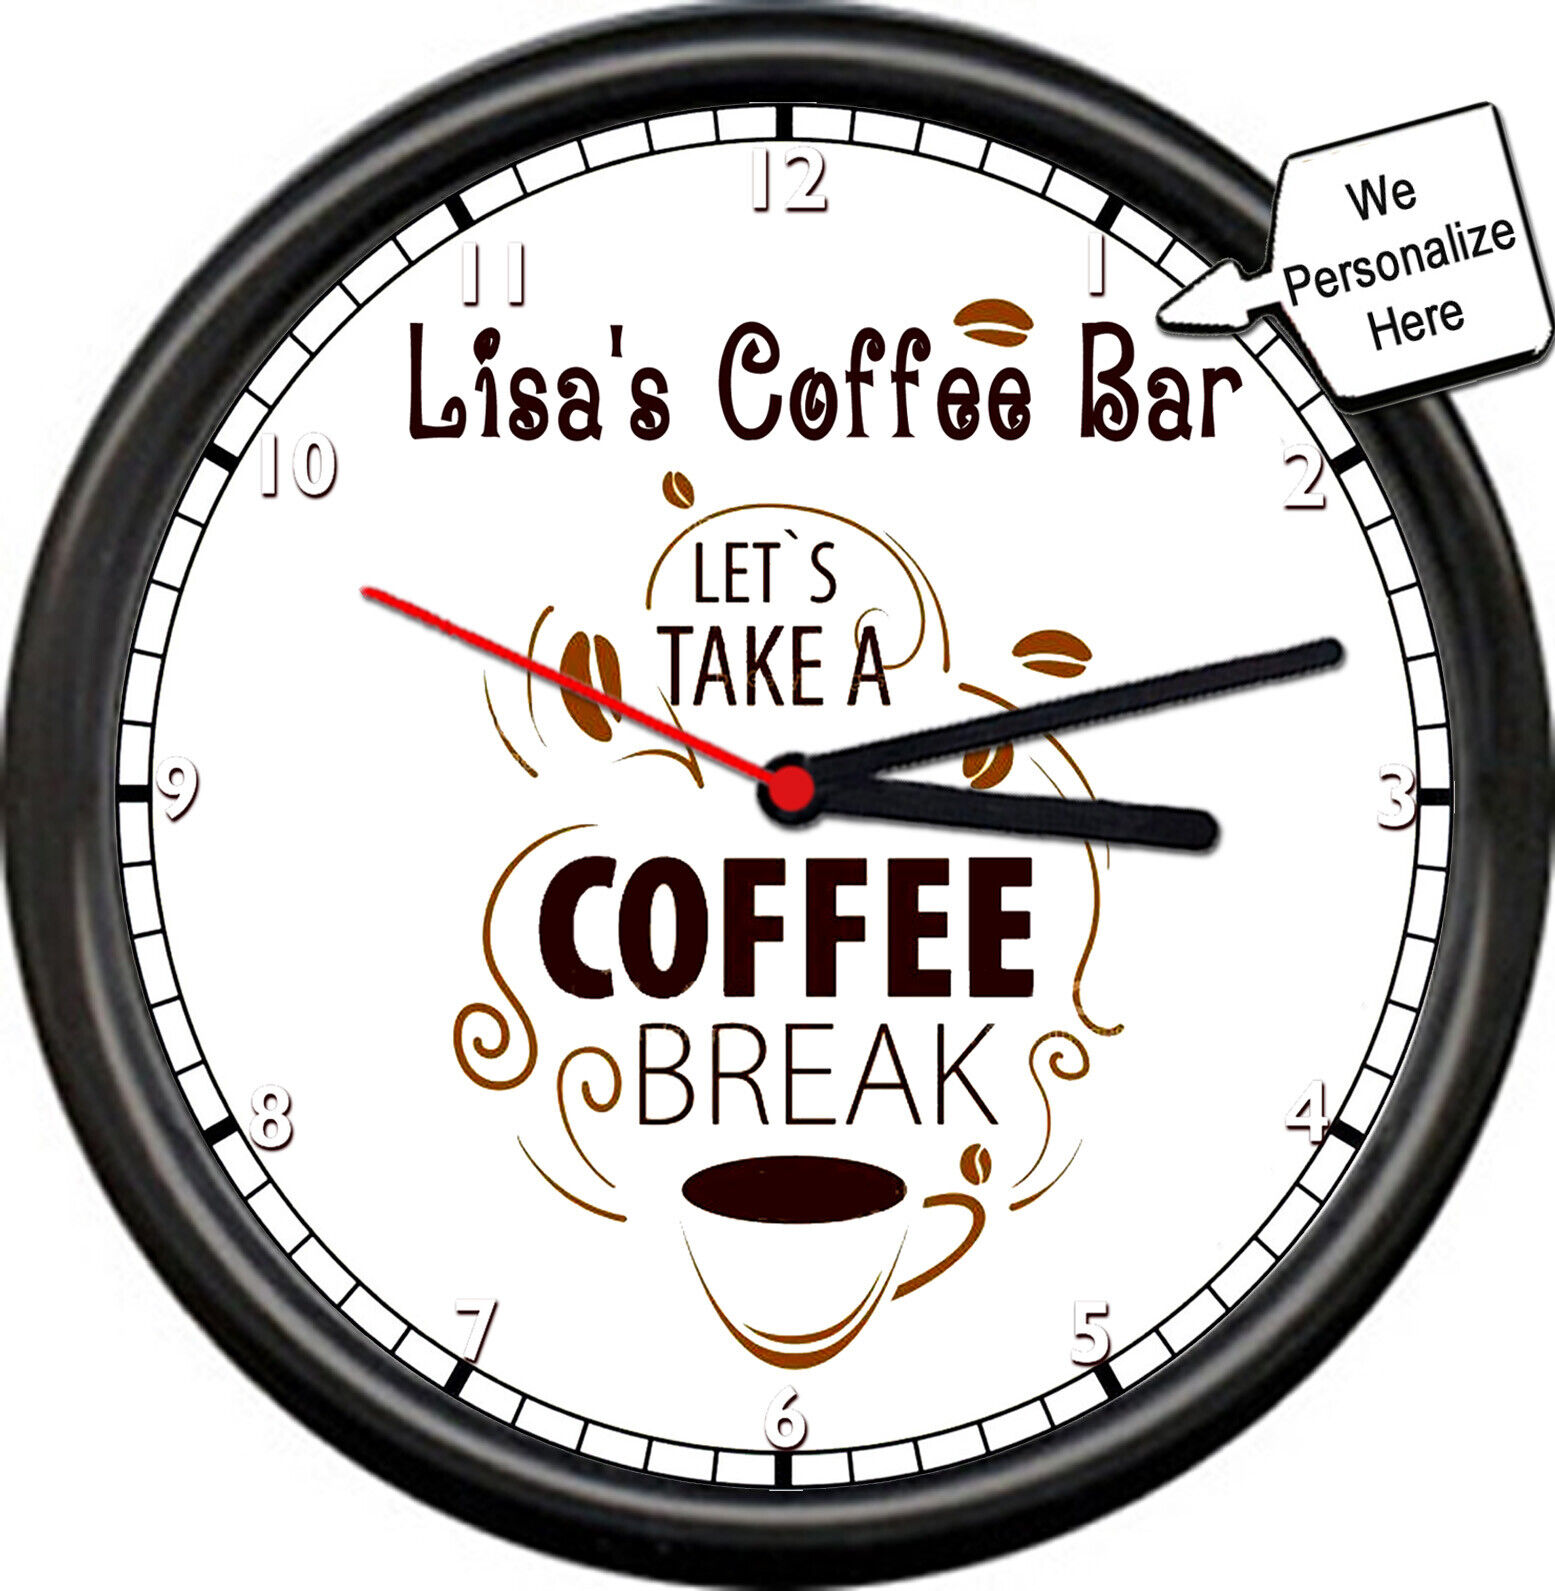 Personalized Coffee Break Bar Java Espresso Your Name Kitchen Sign Wall Clock